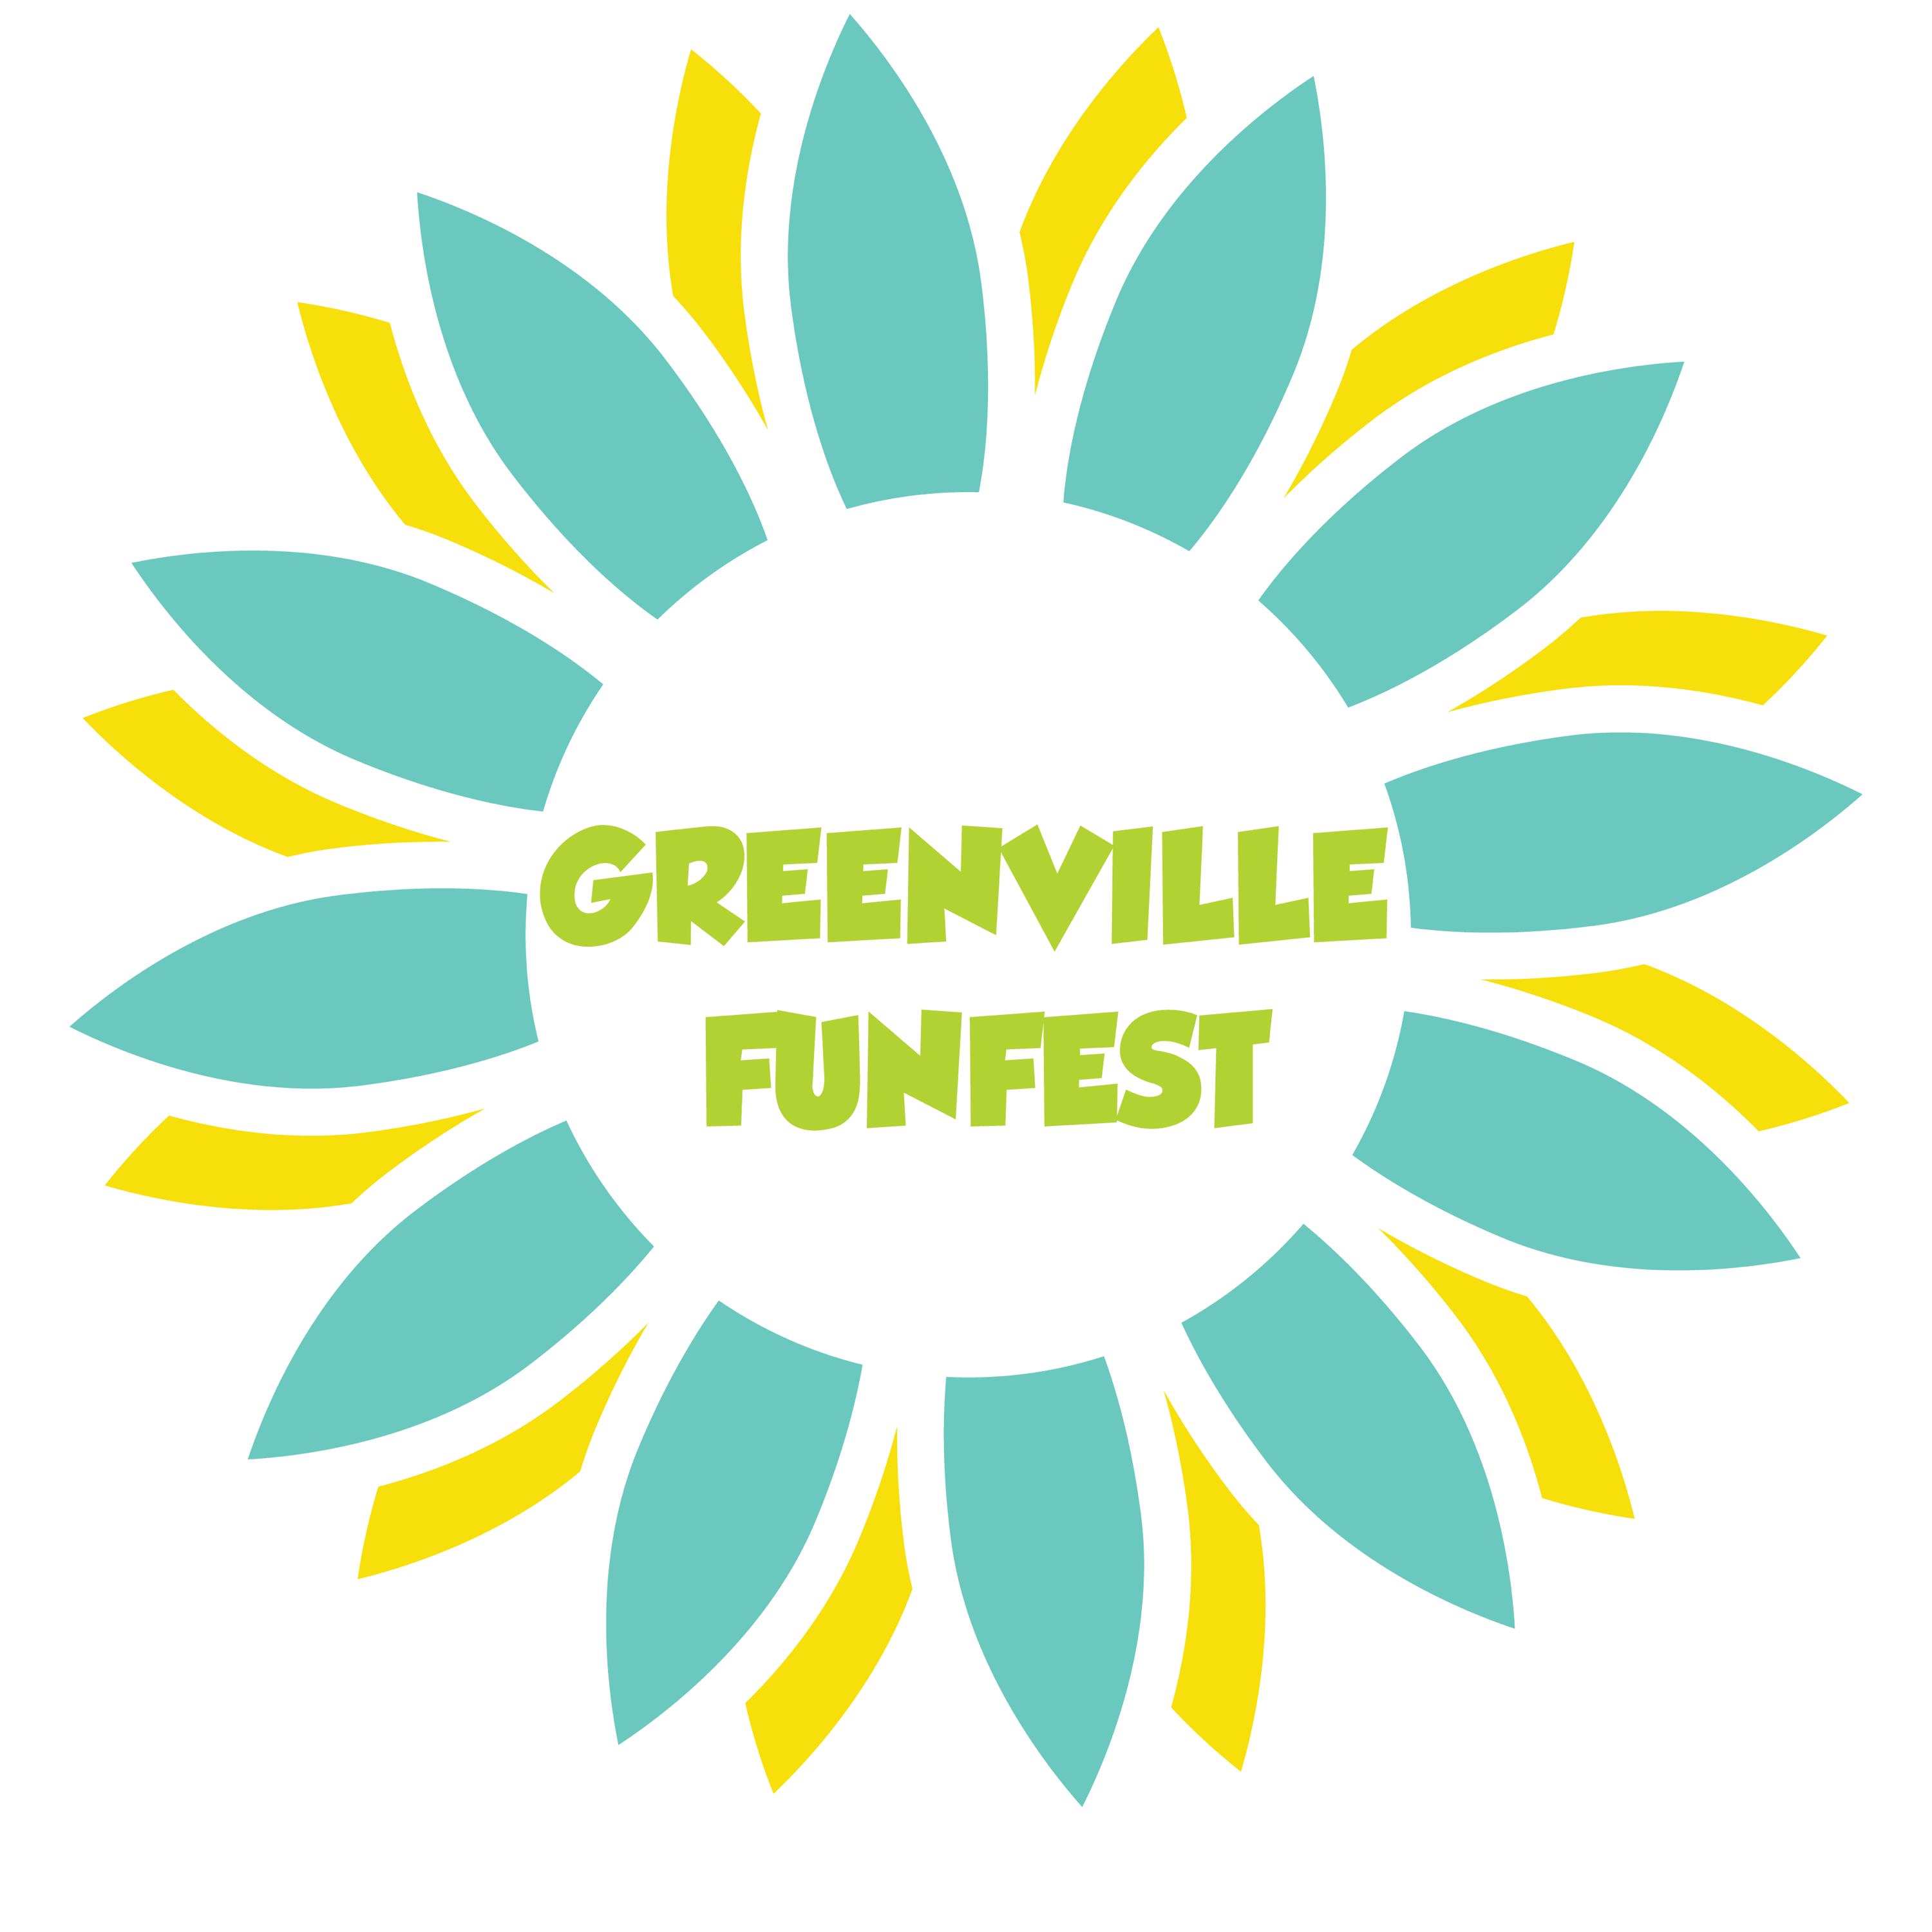 Greenville FunFest will take place, rain or shine, from 11am – 5pm. The event is outdoors, but covered at West End Events at Fluor Field, 935 S. Main Street, Greenville, SC 29601.